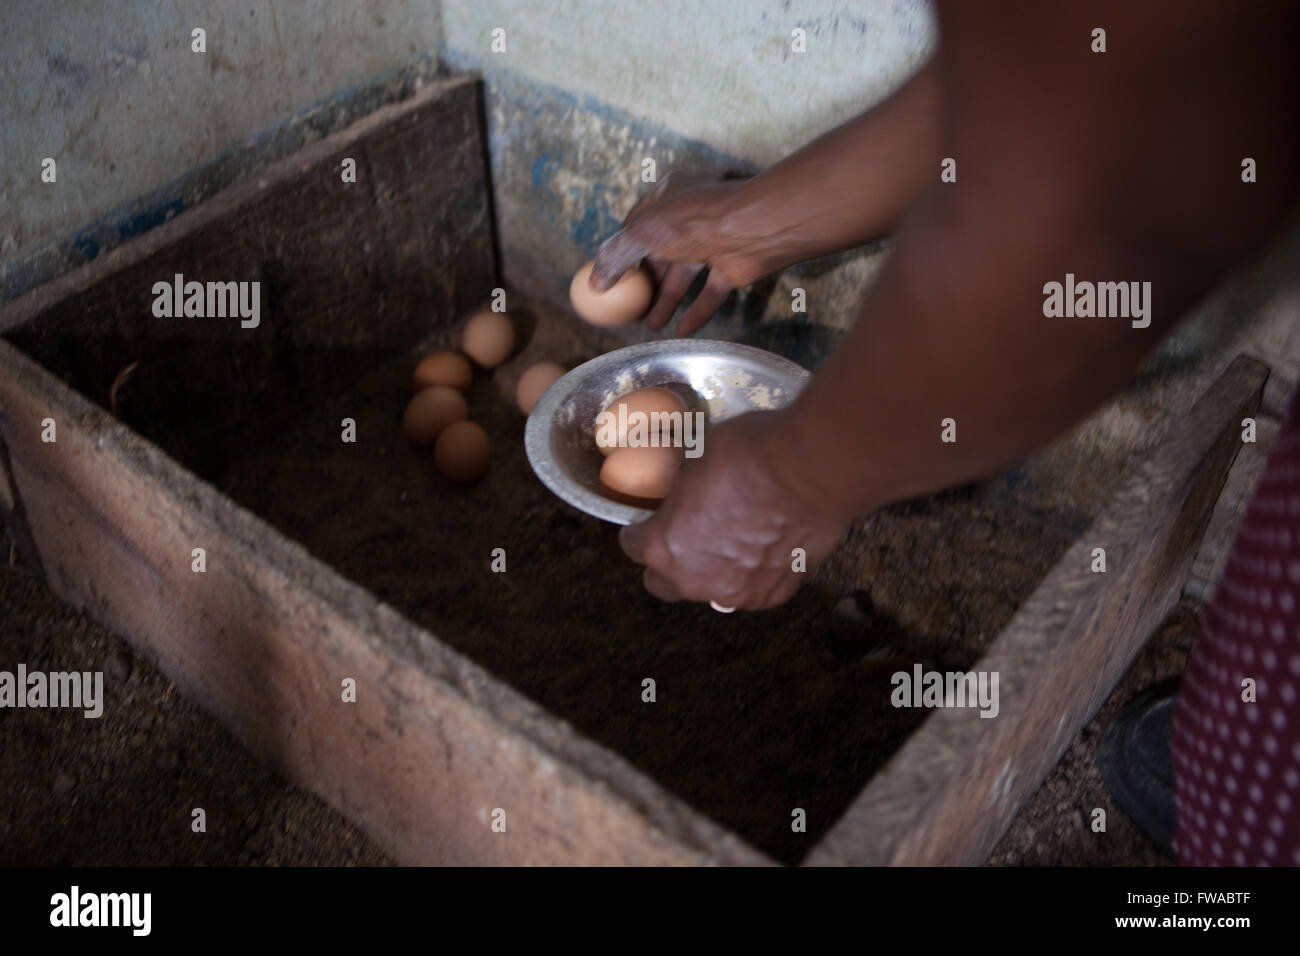 A female egg farmer collects fresh eggs from her chickens, Nigeria, Africa Stock Photo